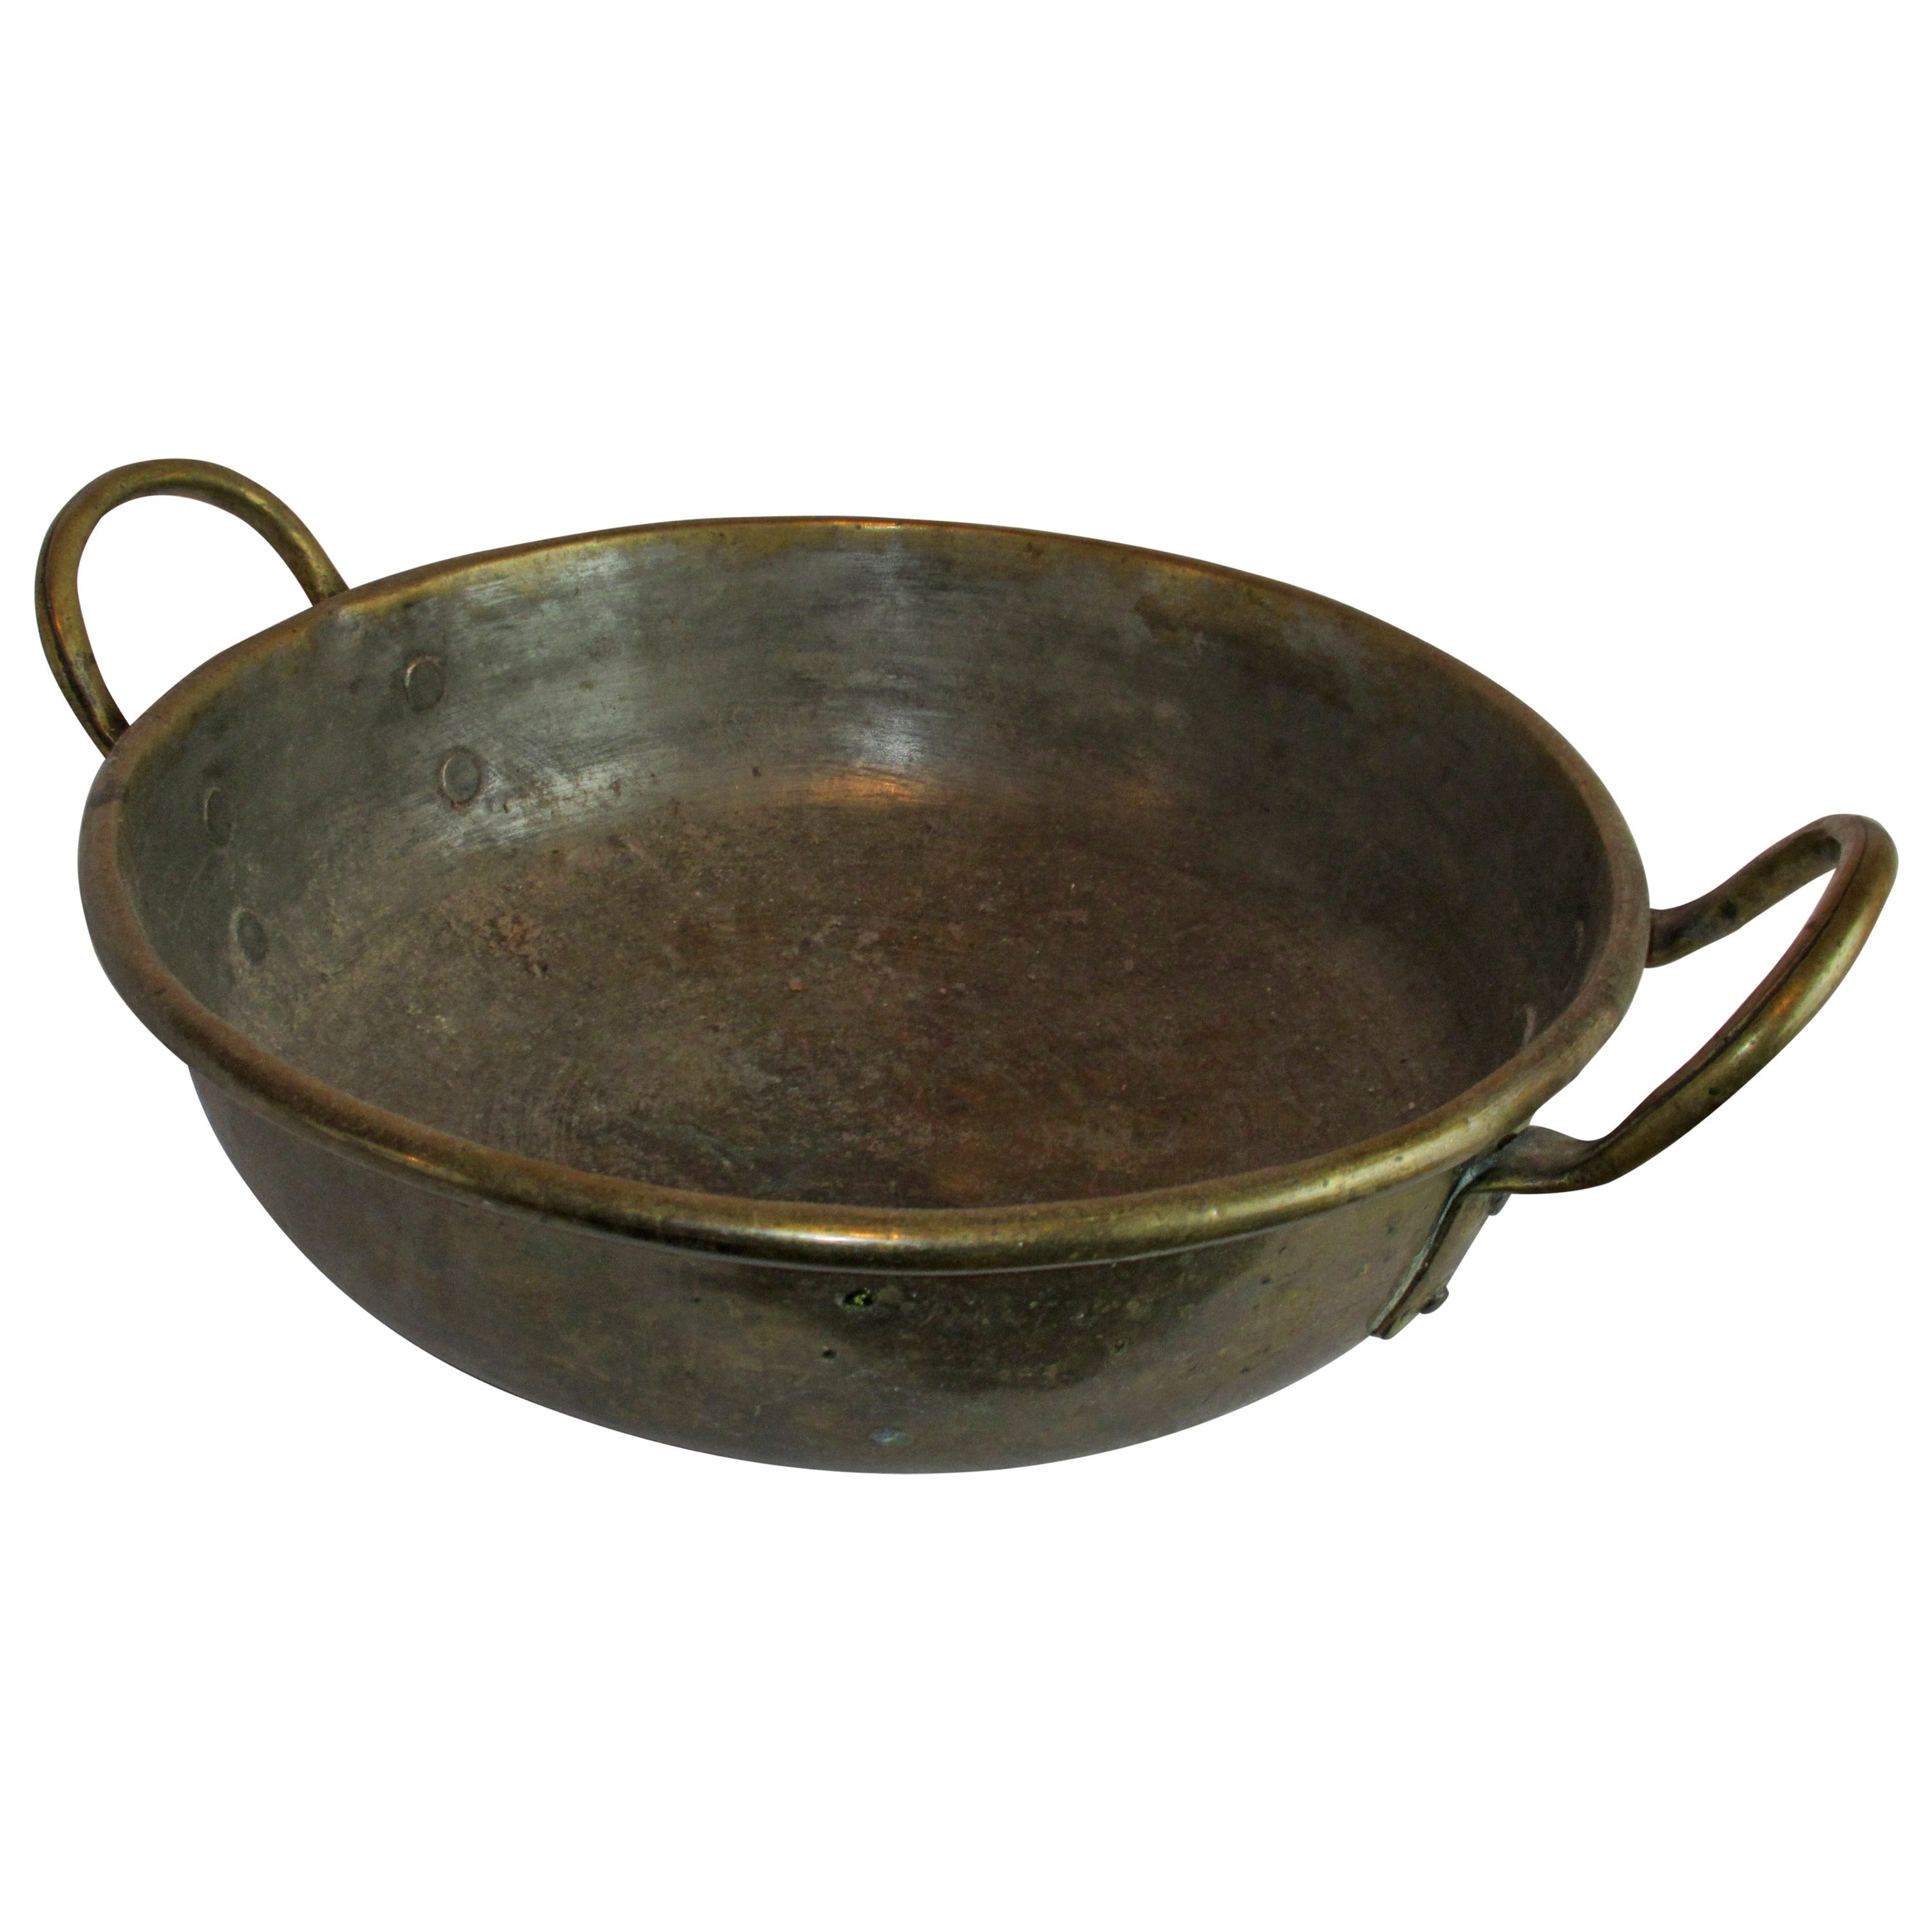 Brass 'Gratin Dish' or 'Gratinating Pan' with Ears For Sale